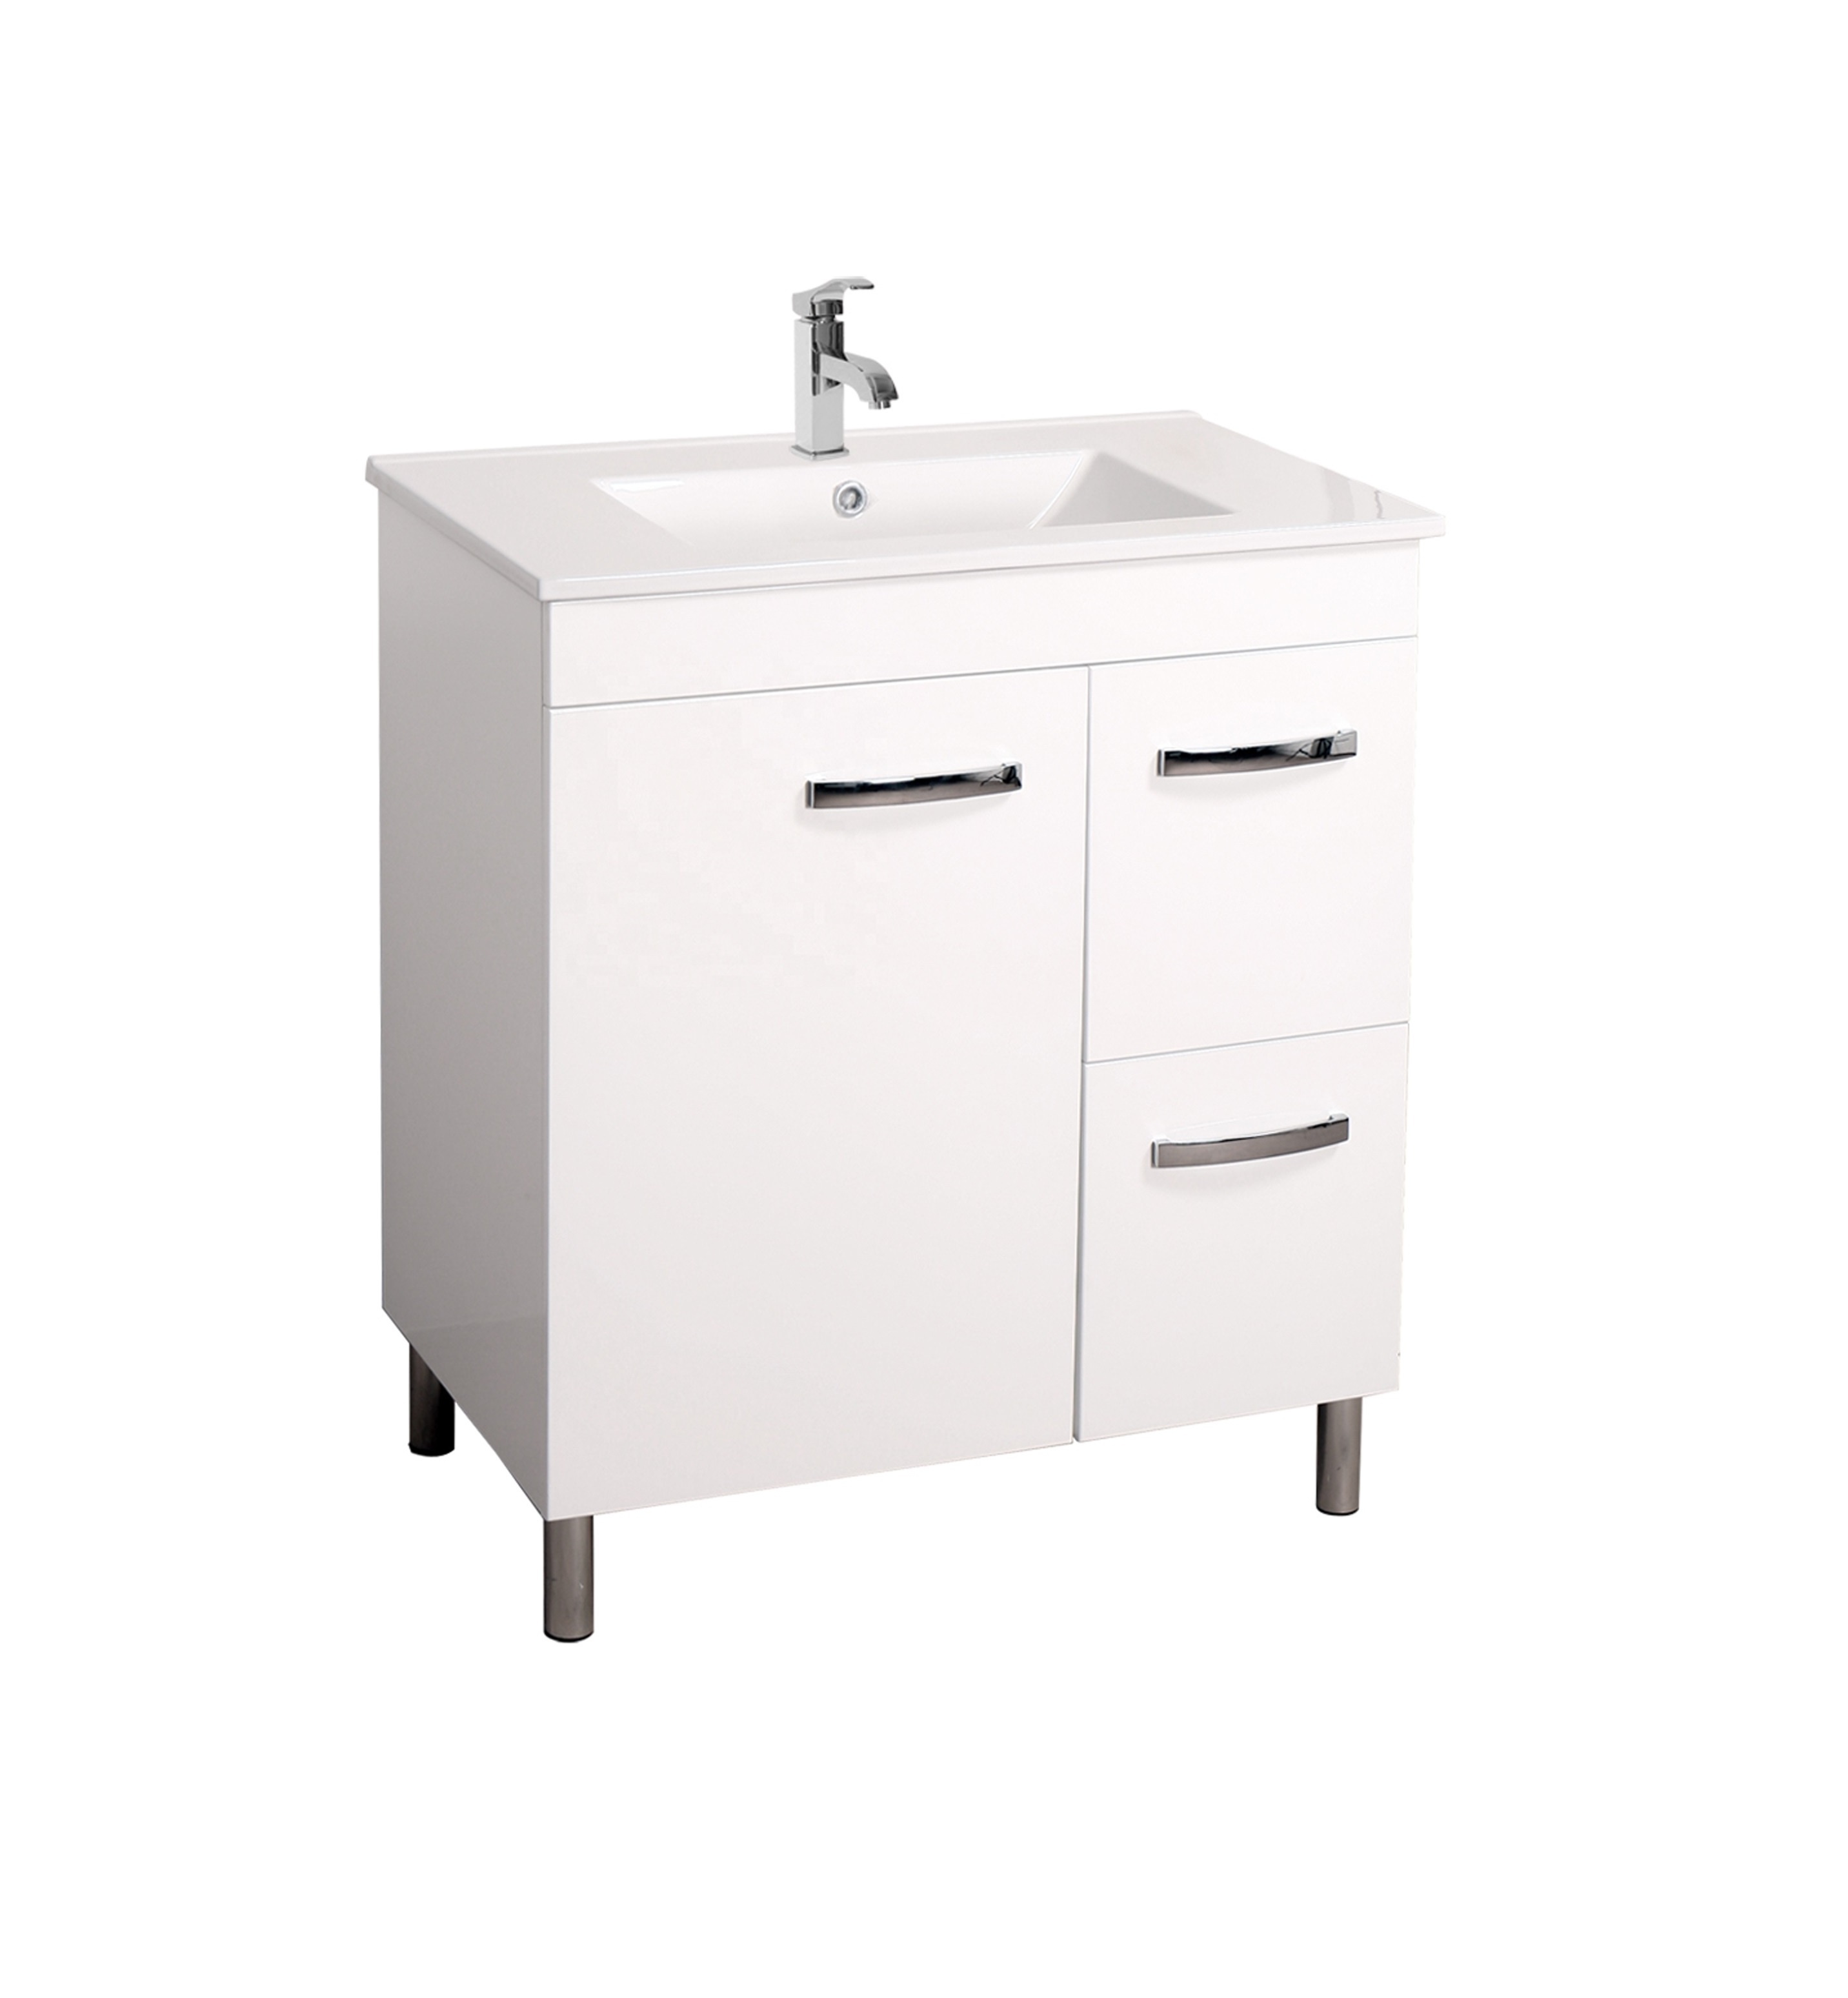 30inch Single Wall Mounted PVC Finish Modern Bathroom Cabinet With Sink